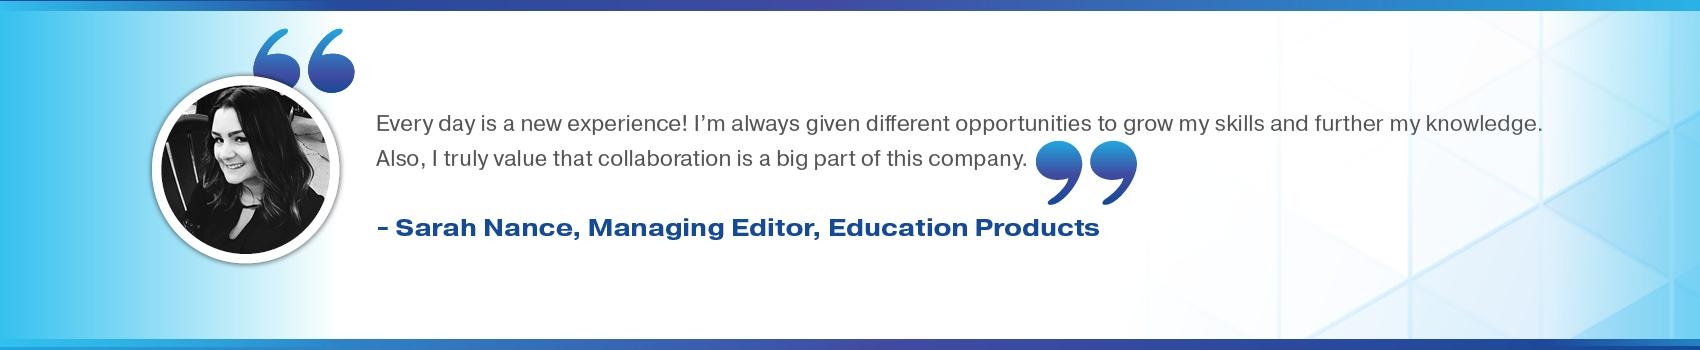 Every day is a new experience! I'm always given different opportunities to grow my skills and further my knowledge. Also, I truly value that collaboration is a big part of this company. Sarah Nance, Managing Editor